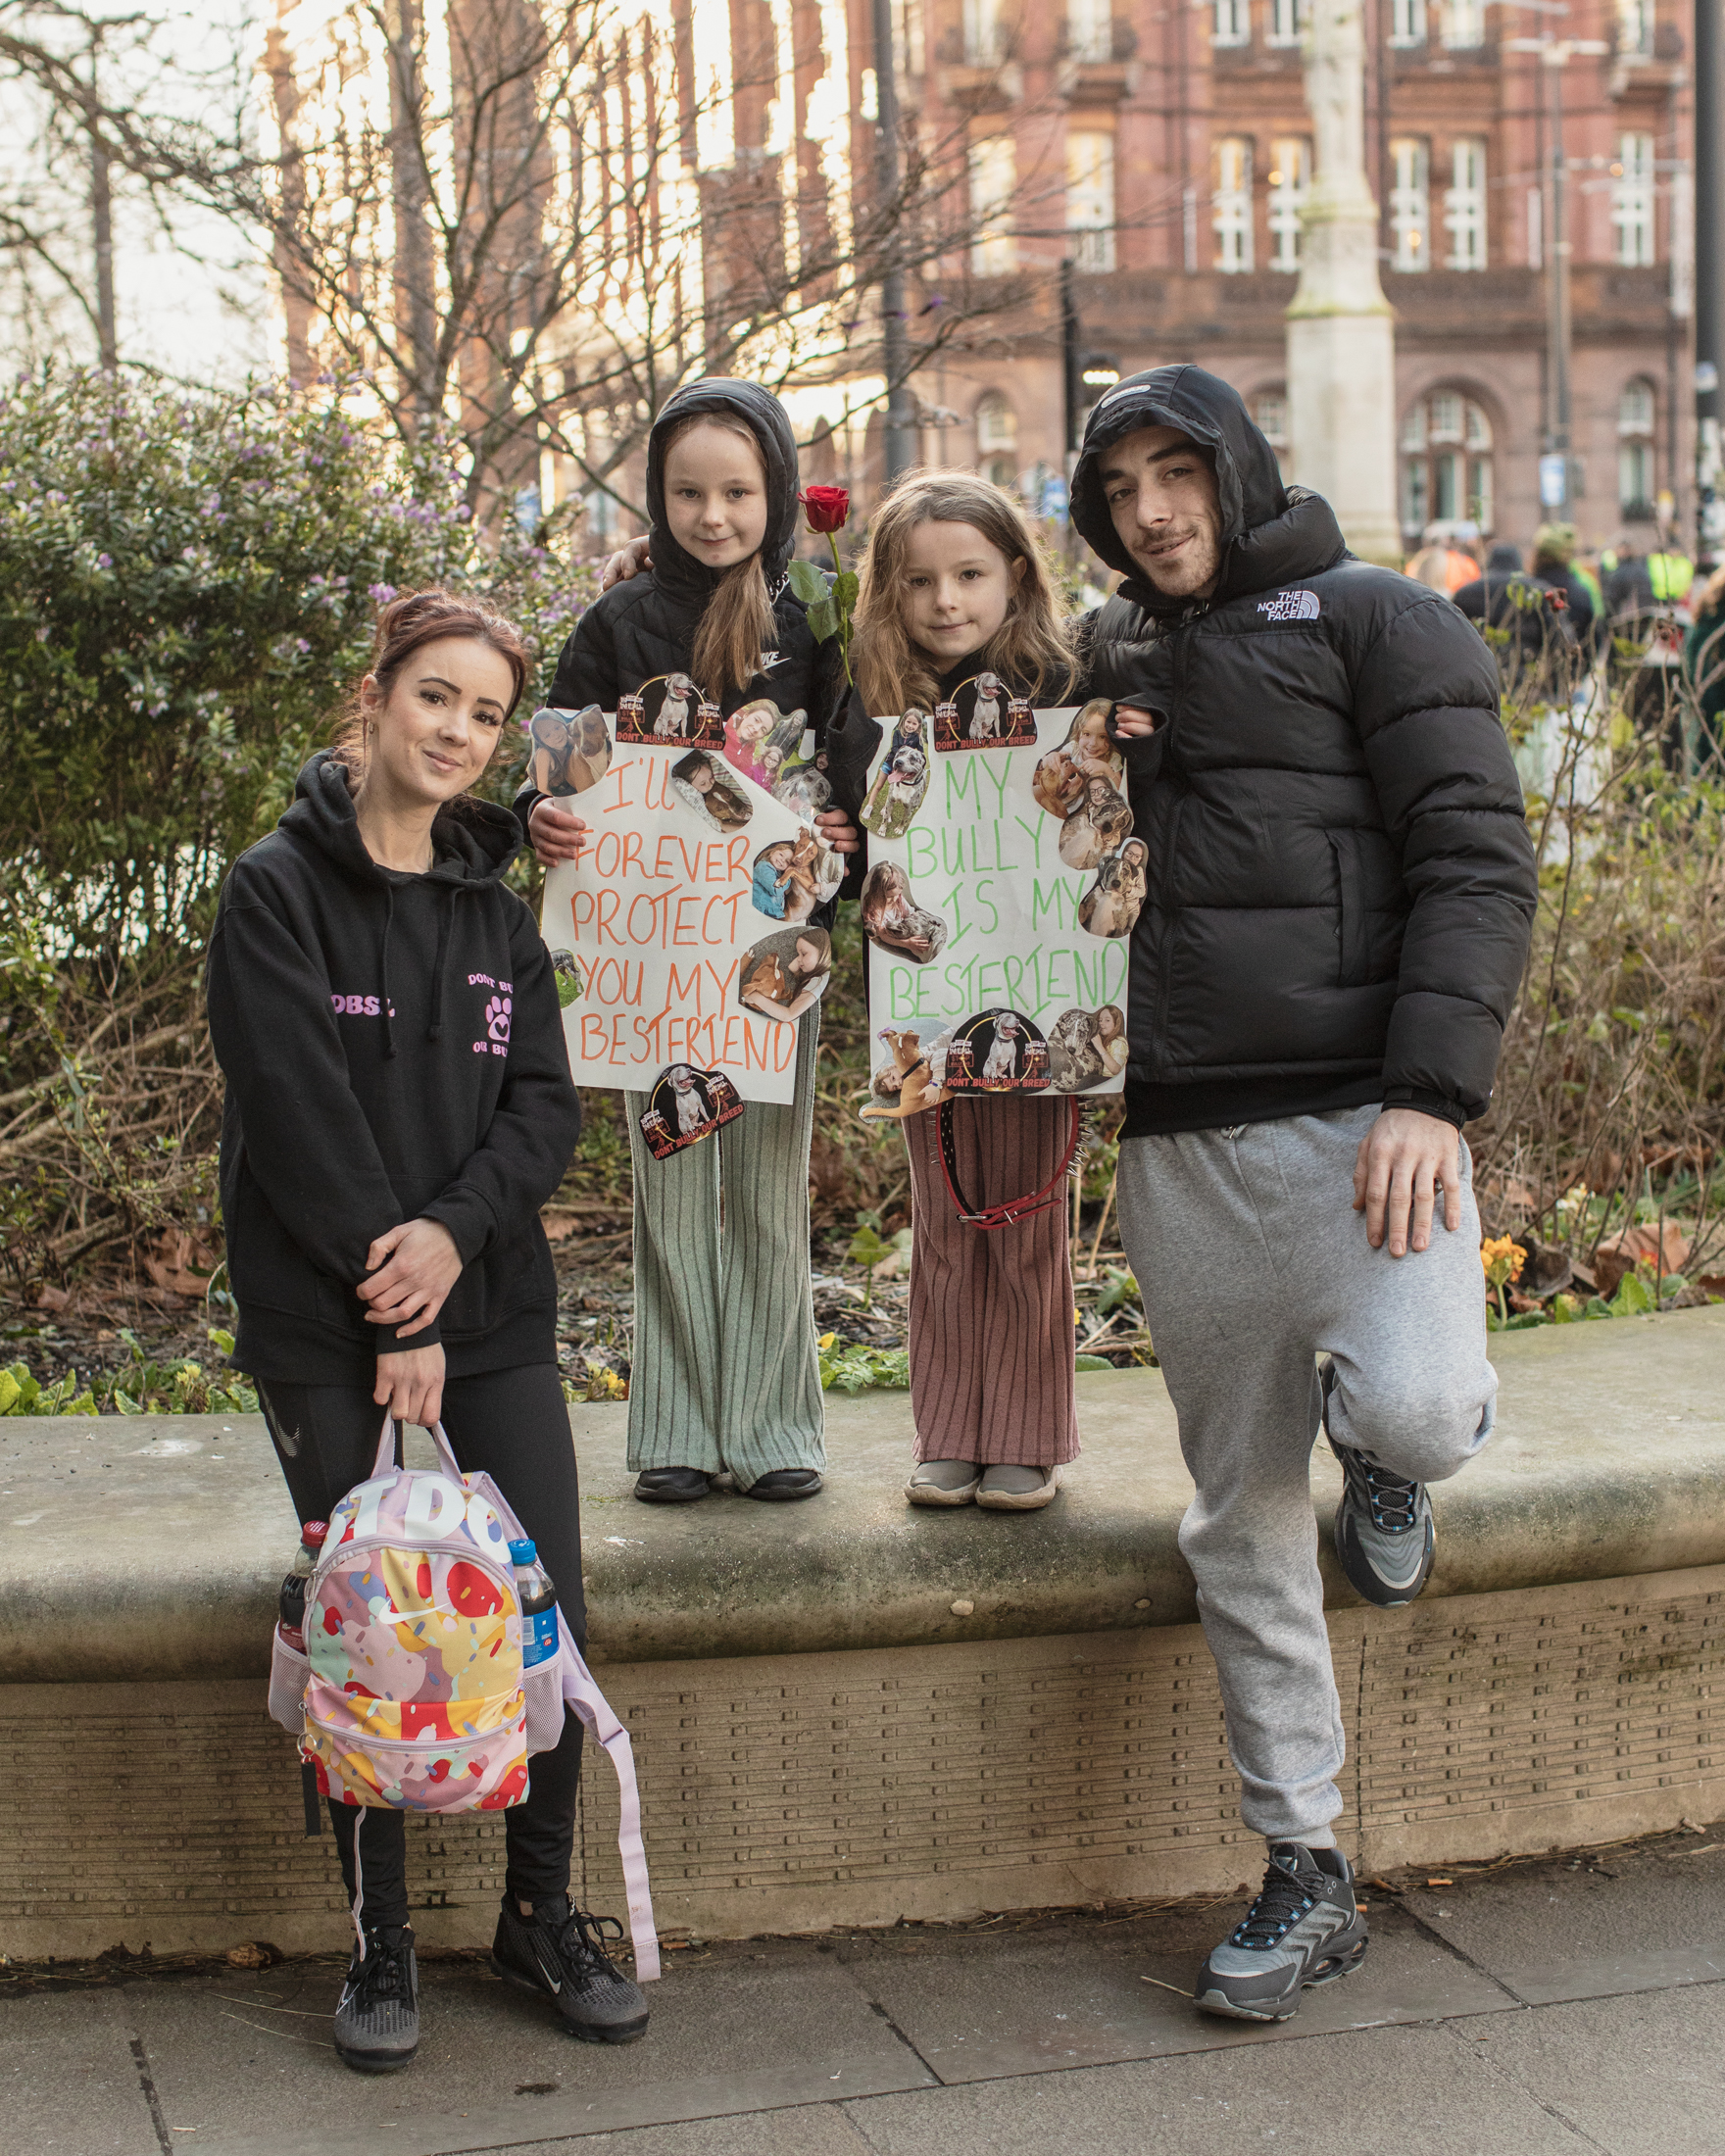 Manchester, UK: A family pose with two kids holding up pro-XL Bully signs